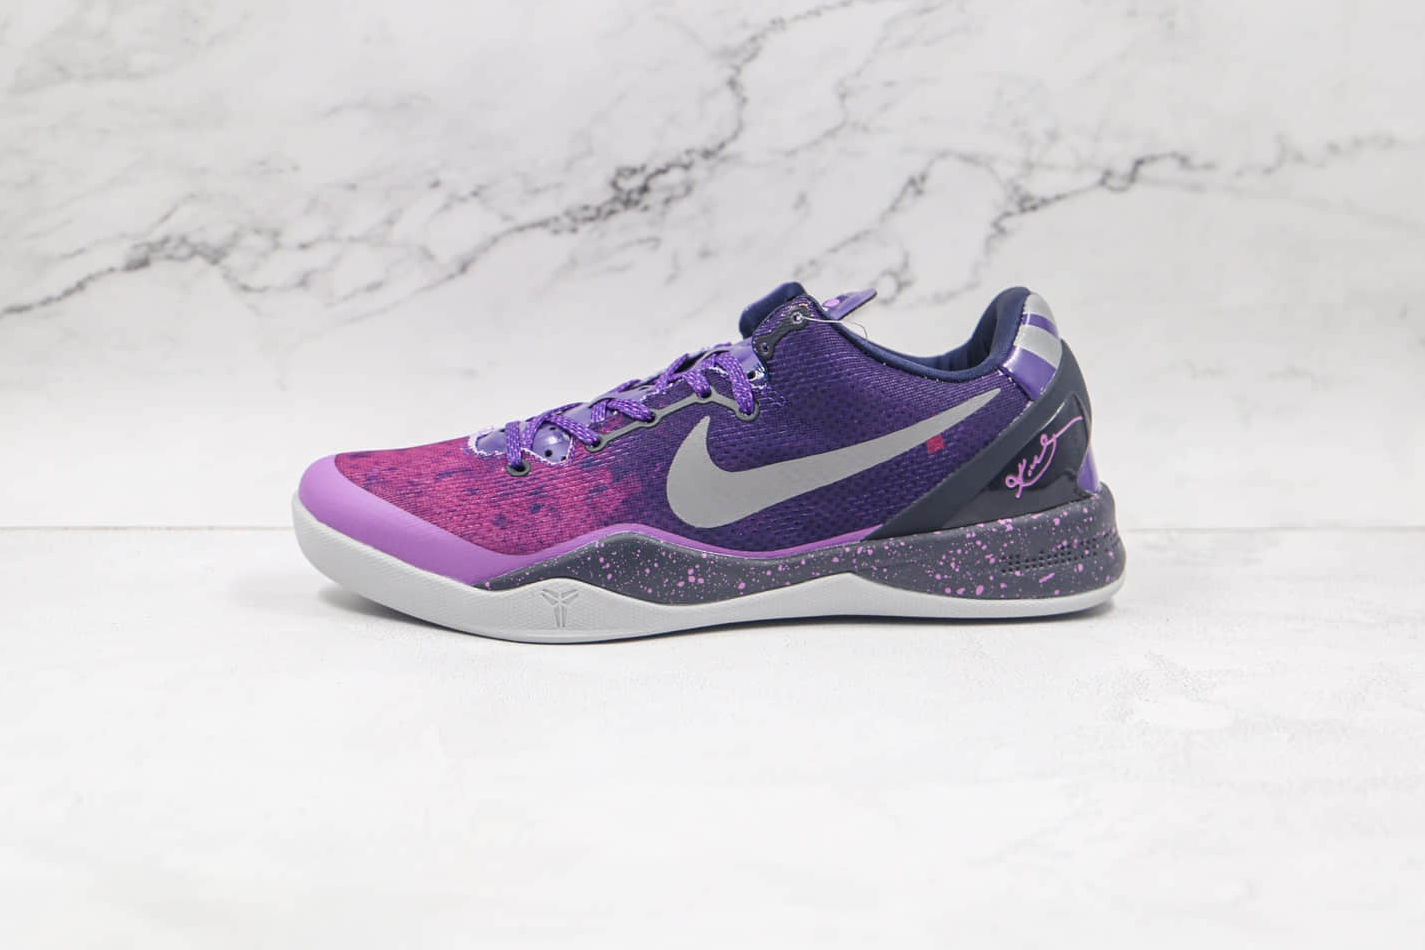 Nike Kobe 8 System 'Playoff' 555035-500 - Shop Now for Elite Performance